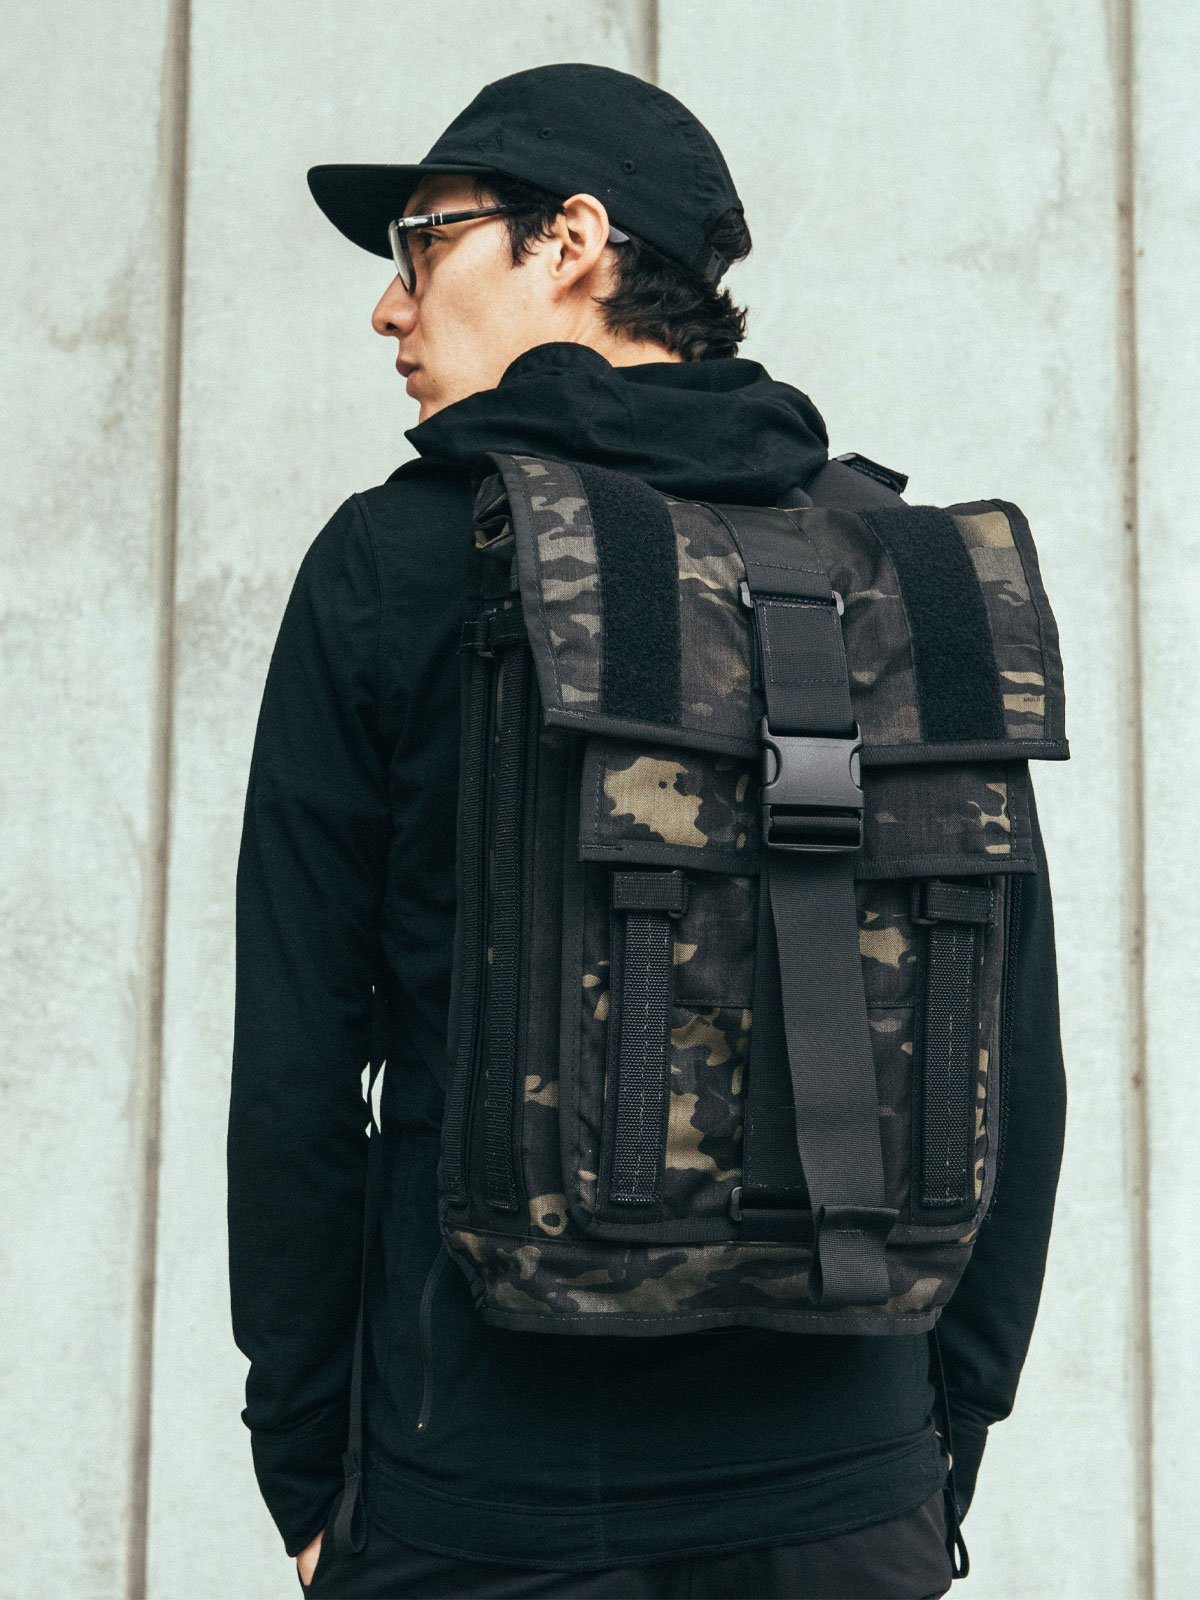 Arkiv Folio by Mission Workshop - Weatherproof Bags & Technical Apparel - San Francisco & Los Angeles - Built to endure - Guaranteed forever